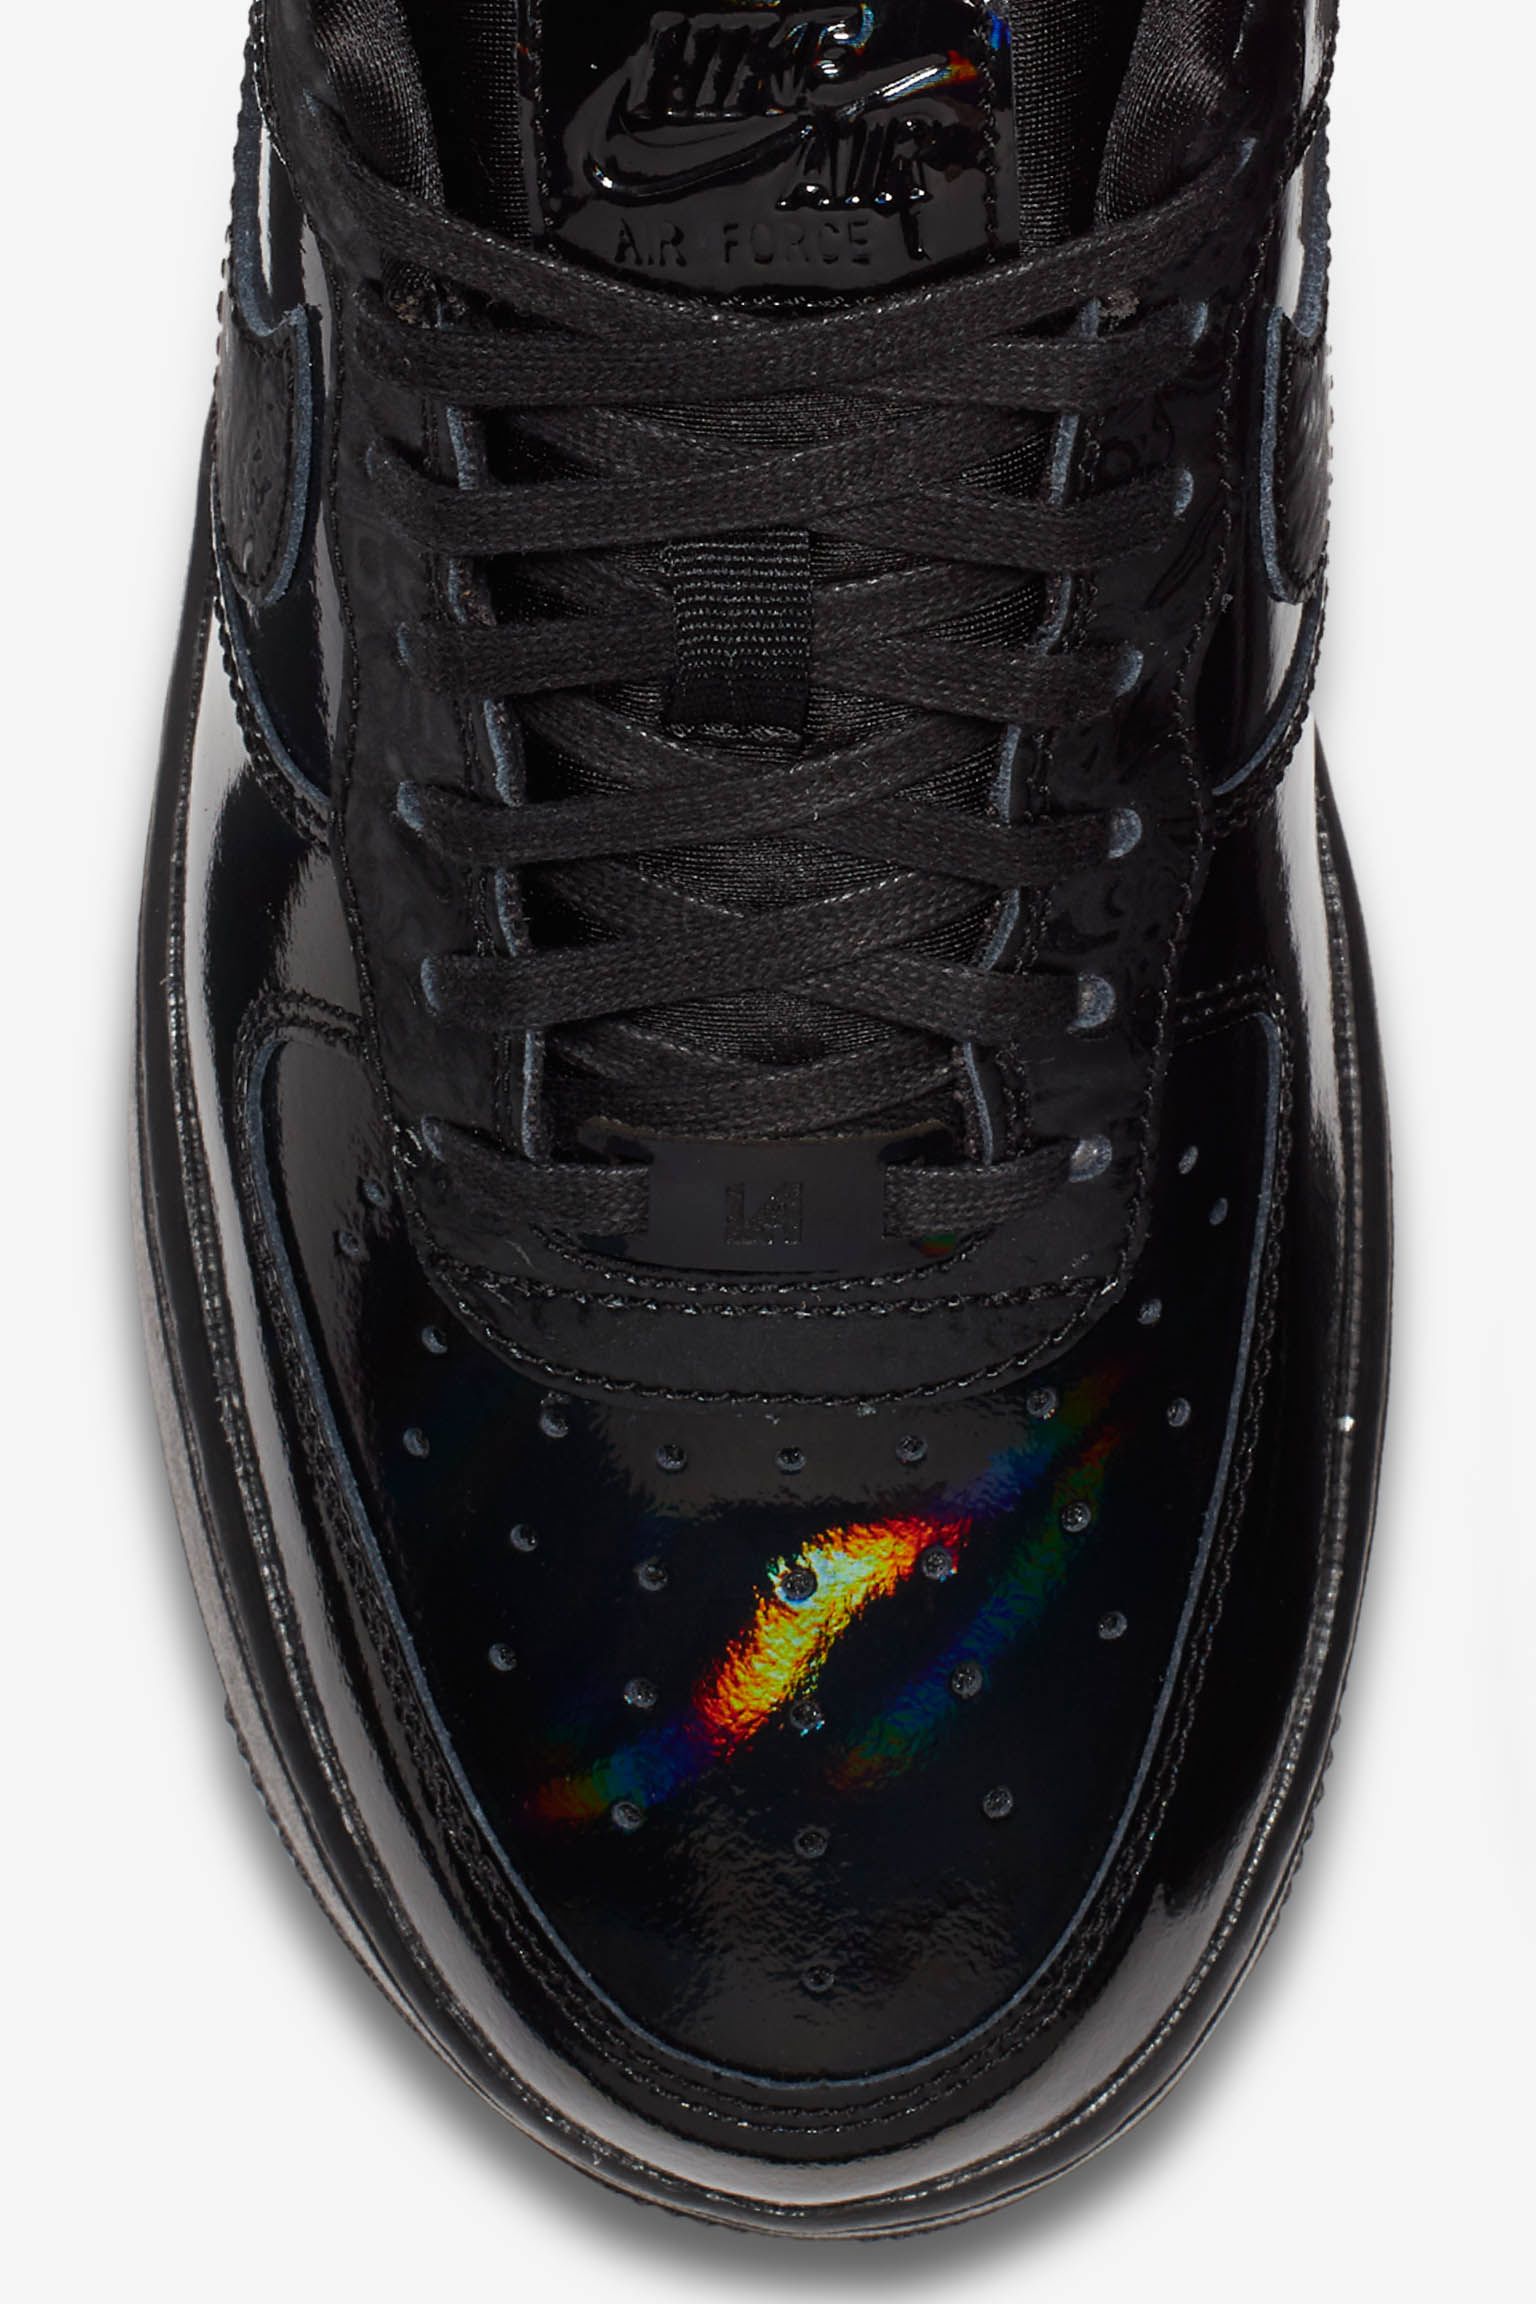 nike air force 1 holographic black